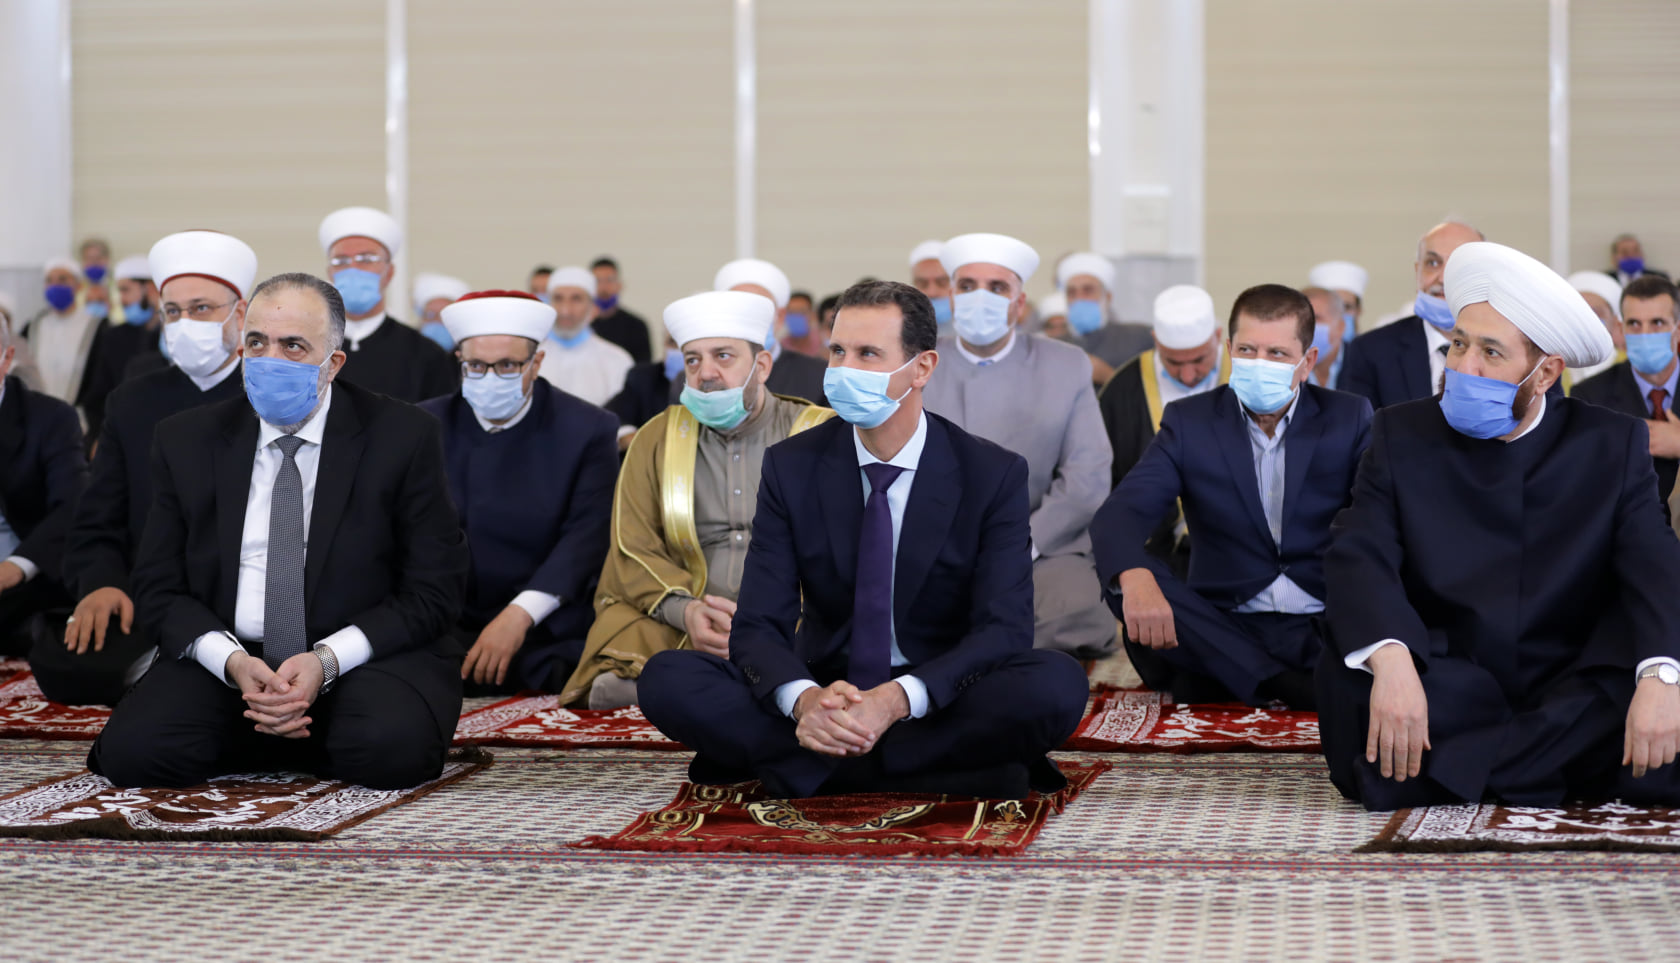 The head of the Syrian regime, Bashar al-Assad, attending a religious festival to mark the birth anniversary of Prophet Mohammed “PBUH” at the Imam al-Shafi’i Mosque in the Mezzeh neighborhood in Damascus - 18 October 2021 (the official Facebook account of the Syrian Presidency)